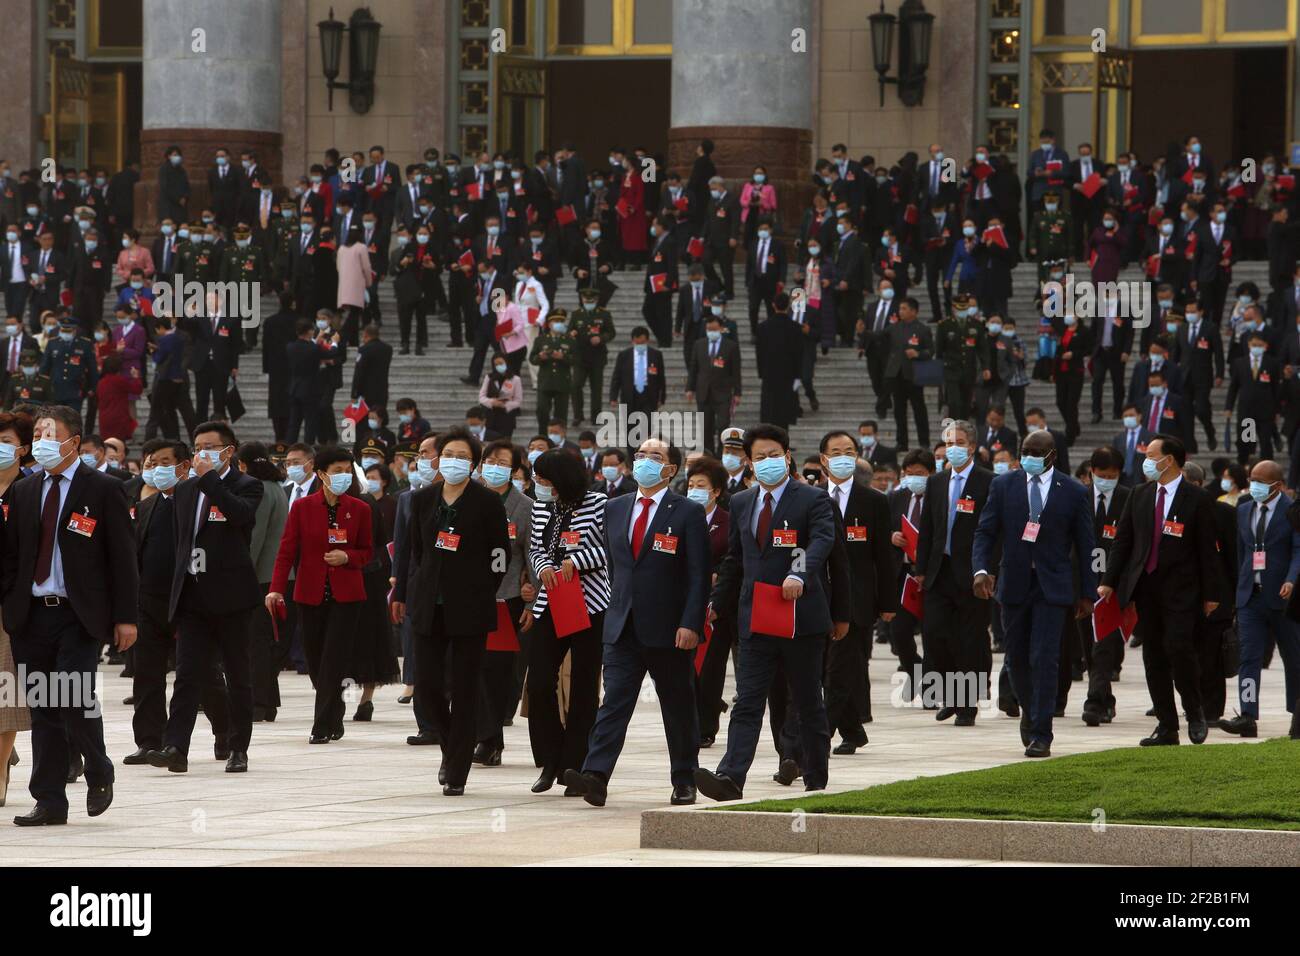 Beijing, China. 11th Mar, 2021. Delegates leave after the end of the closing session of the Fourth Session of the 13th National People's Congress (NPC) being held in the Great Hall of the People In Beijing on Thursday, March 11, 2021. China approved a draft decision to overhaul Hong Kong's electoral system, its latest move to tighten control over the city, by passing the 'patriots governing Hong Kong' resolution at the NPC. Photo by Stephen Shaver/UPI Credit: UPI/Alamy Live News Stock Photo